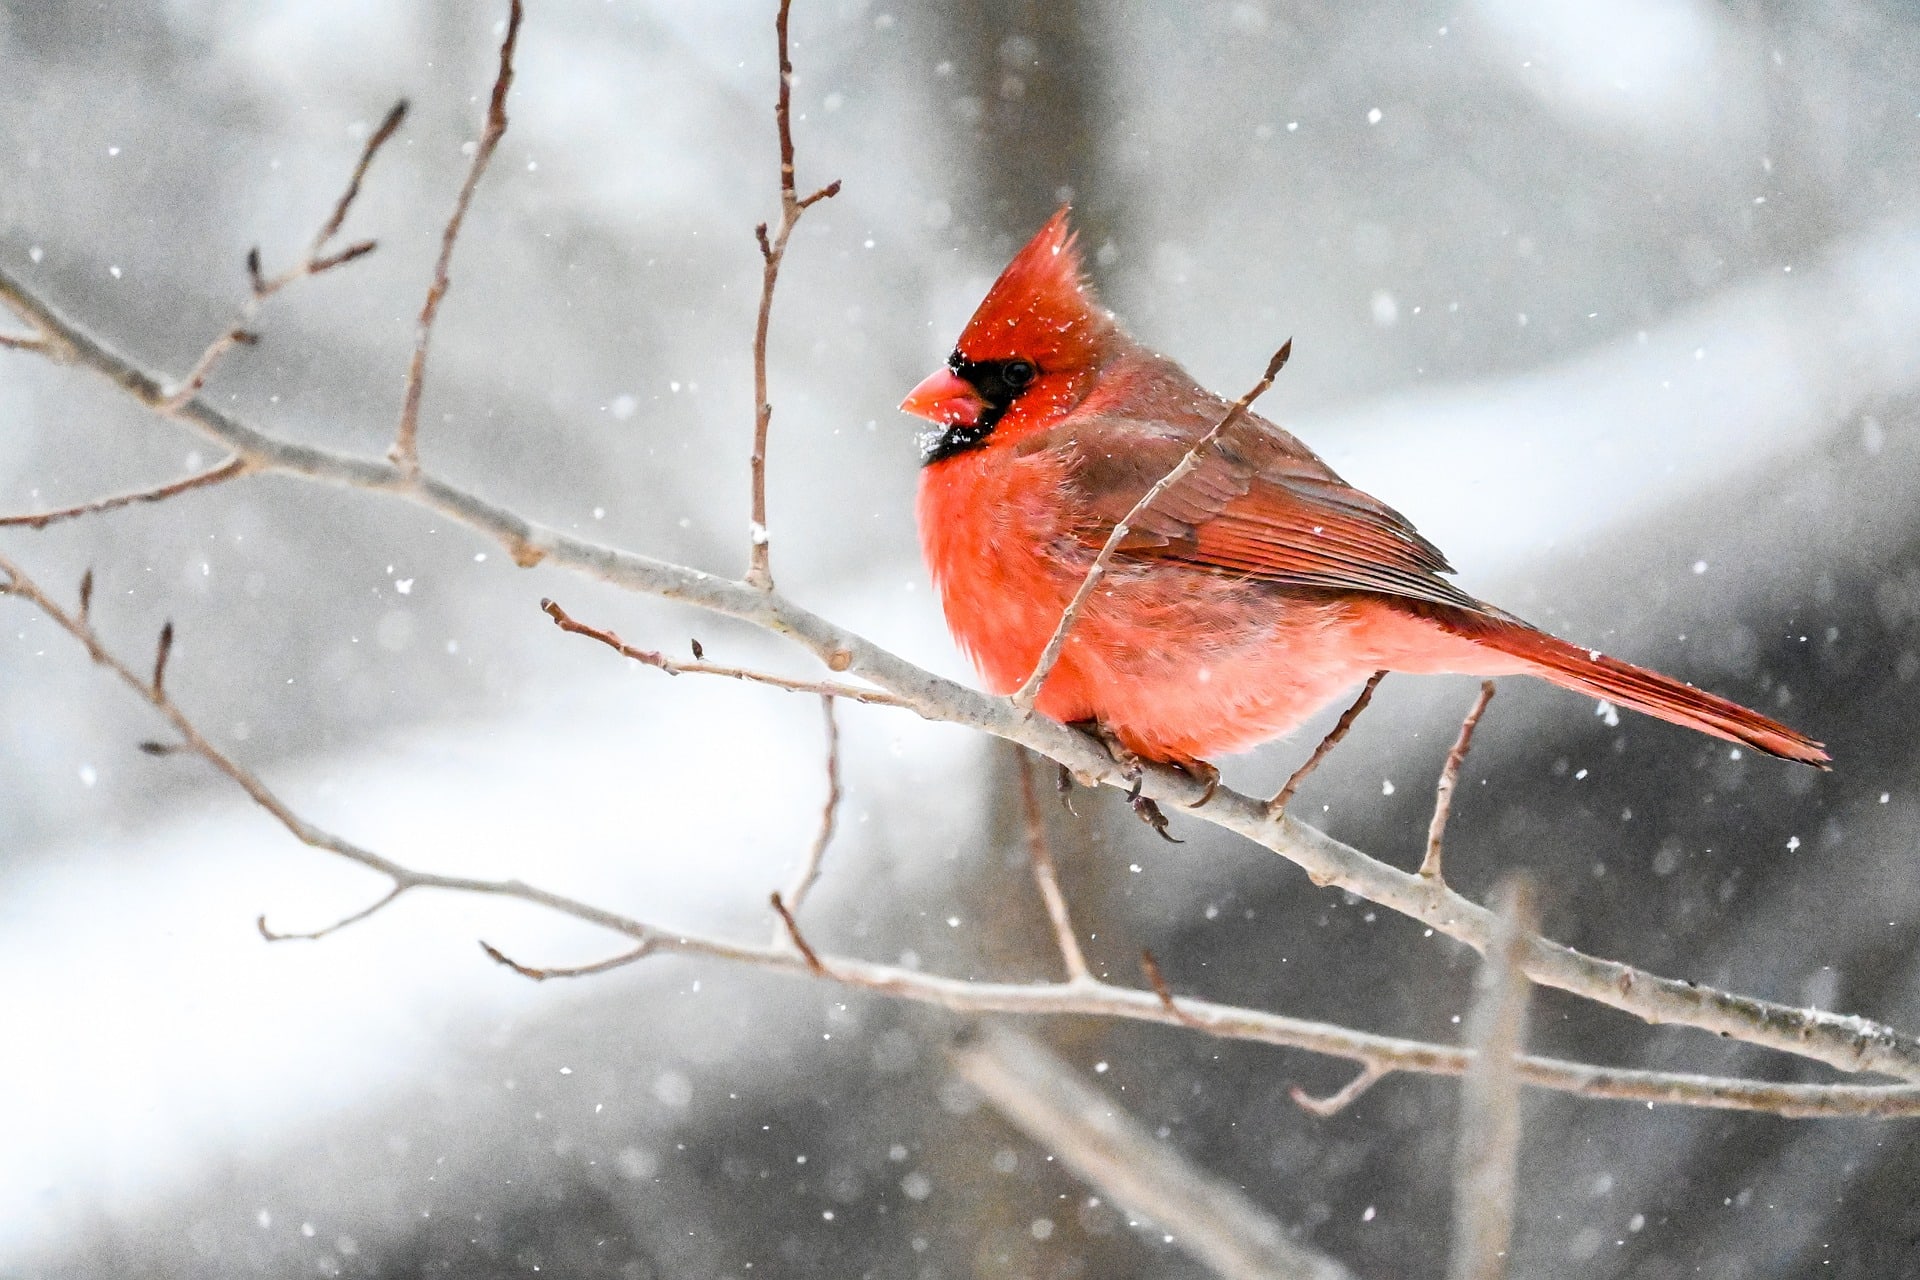 A male cardinal perches on a branch while it snows.